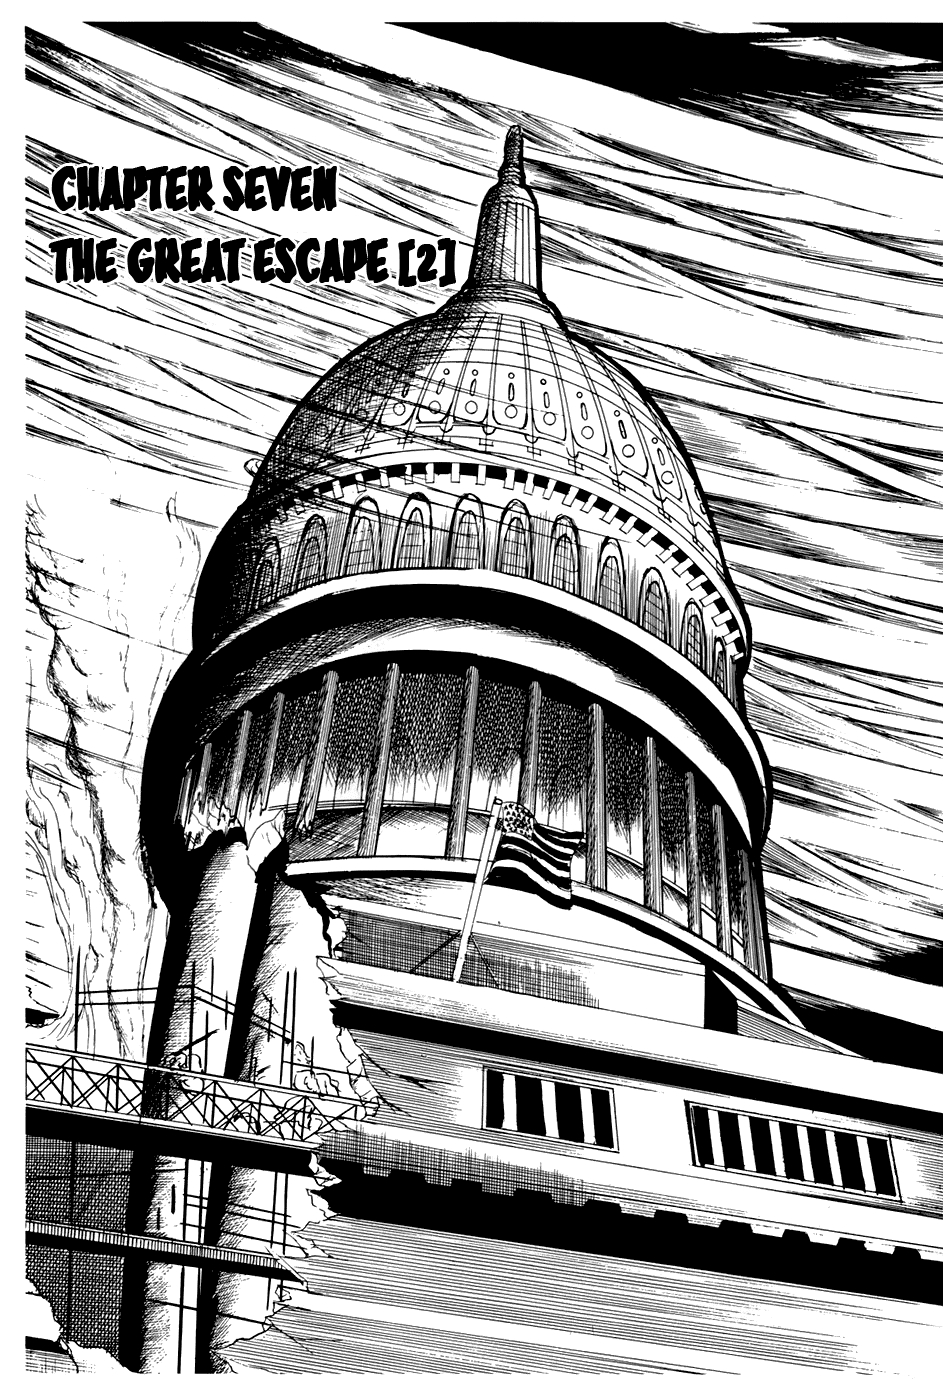 Fourteen Vol. 10 Ch. 181 The Great Escape (2)